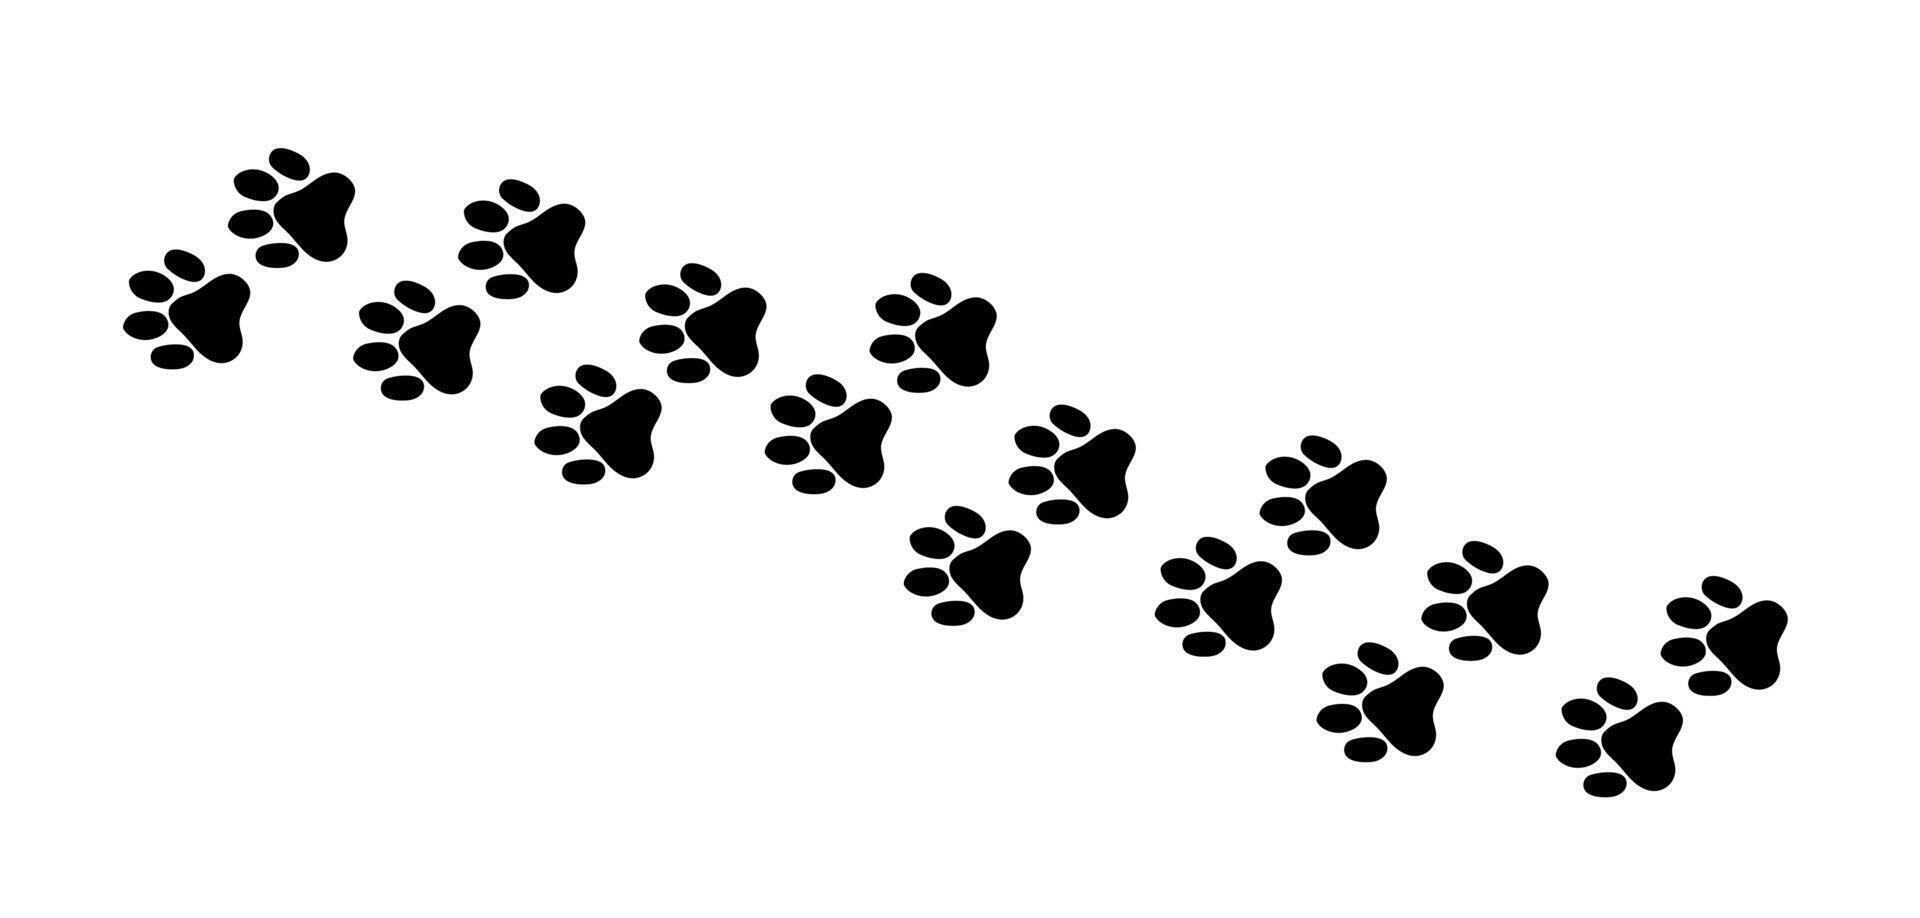 There are many traces of silhouettes of black paws of a wild animal - a cat. illustration vector